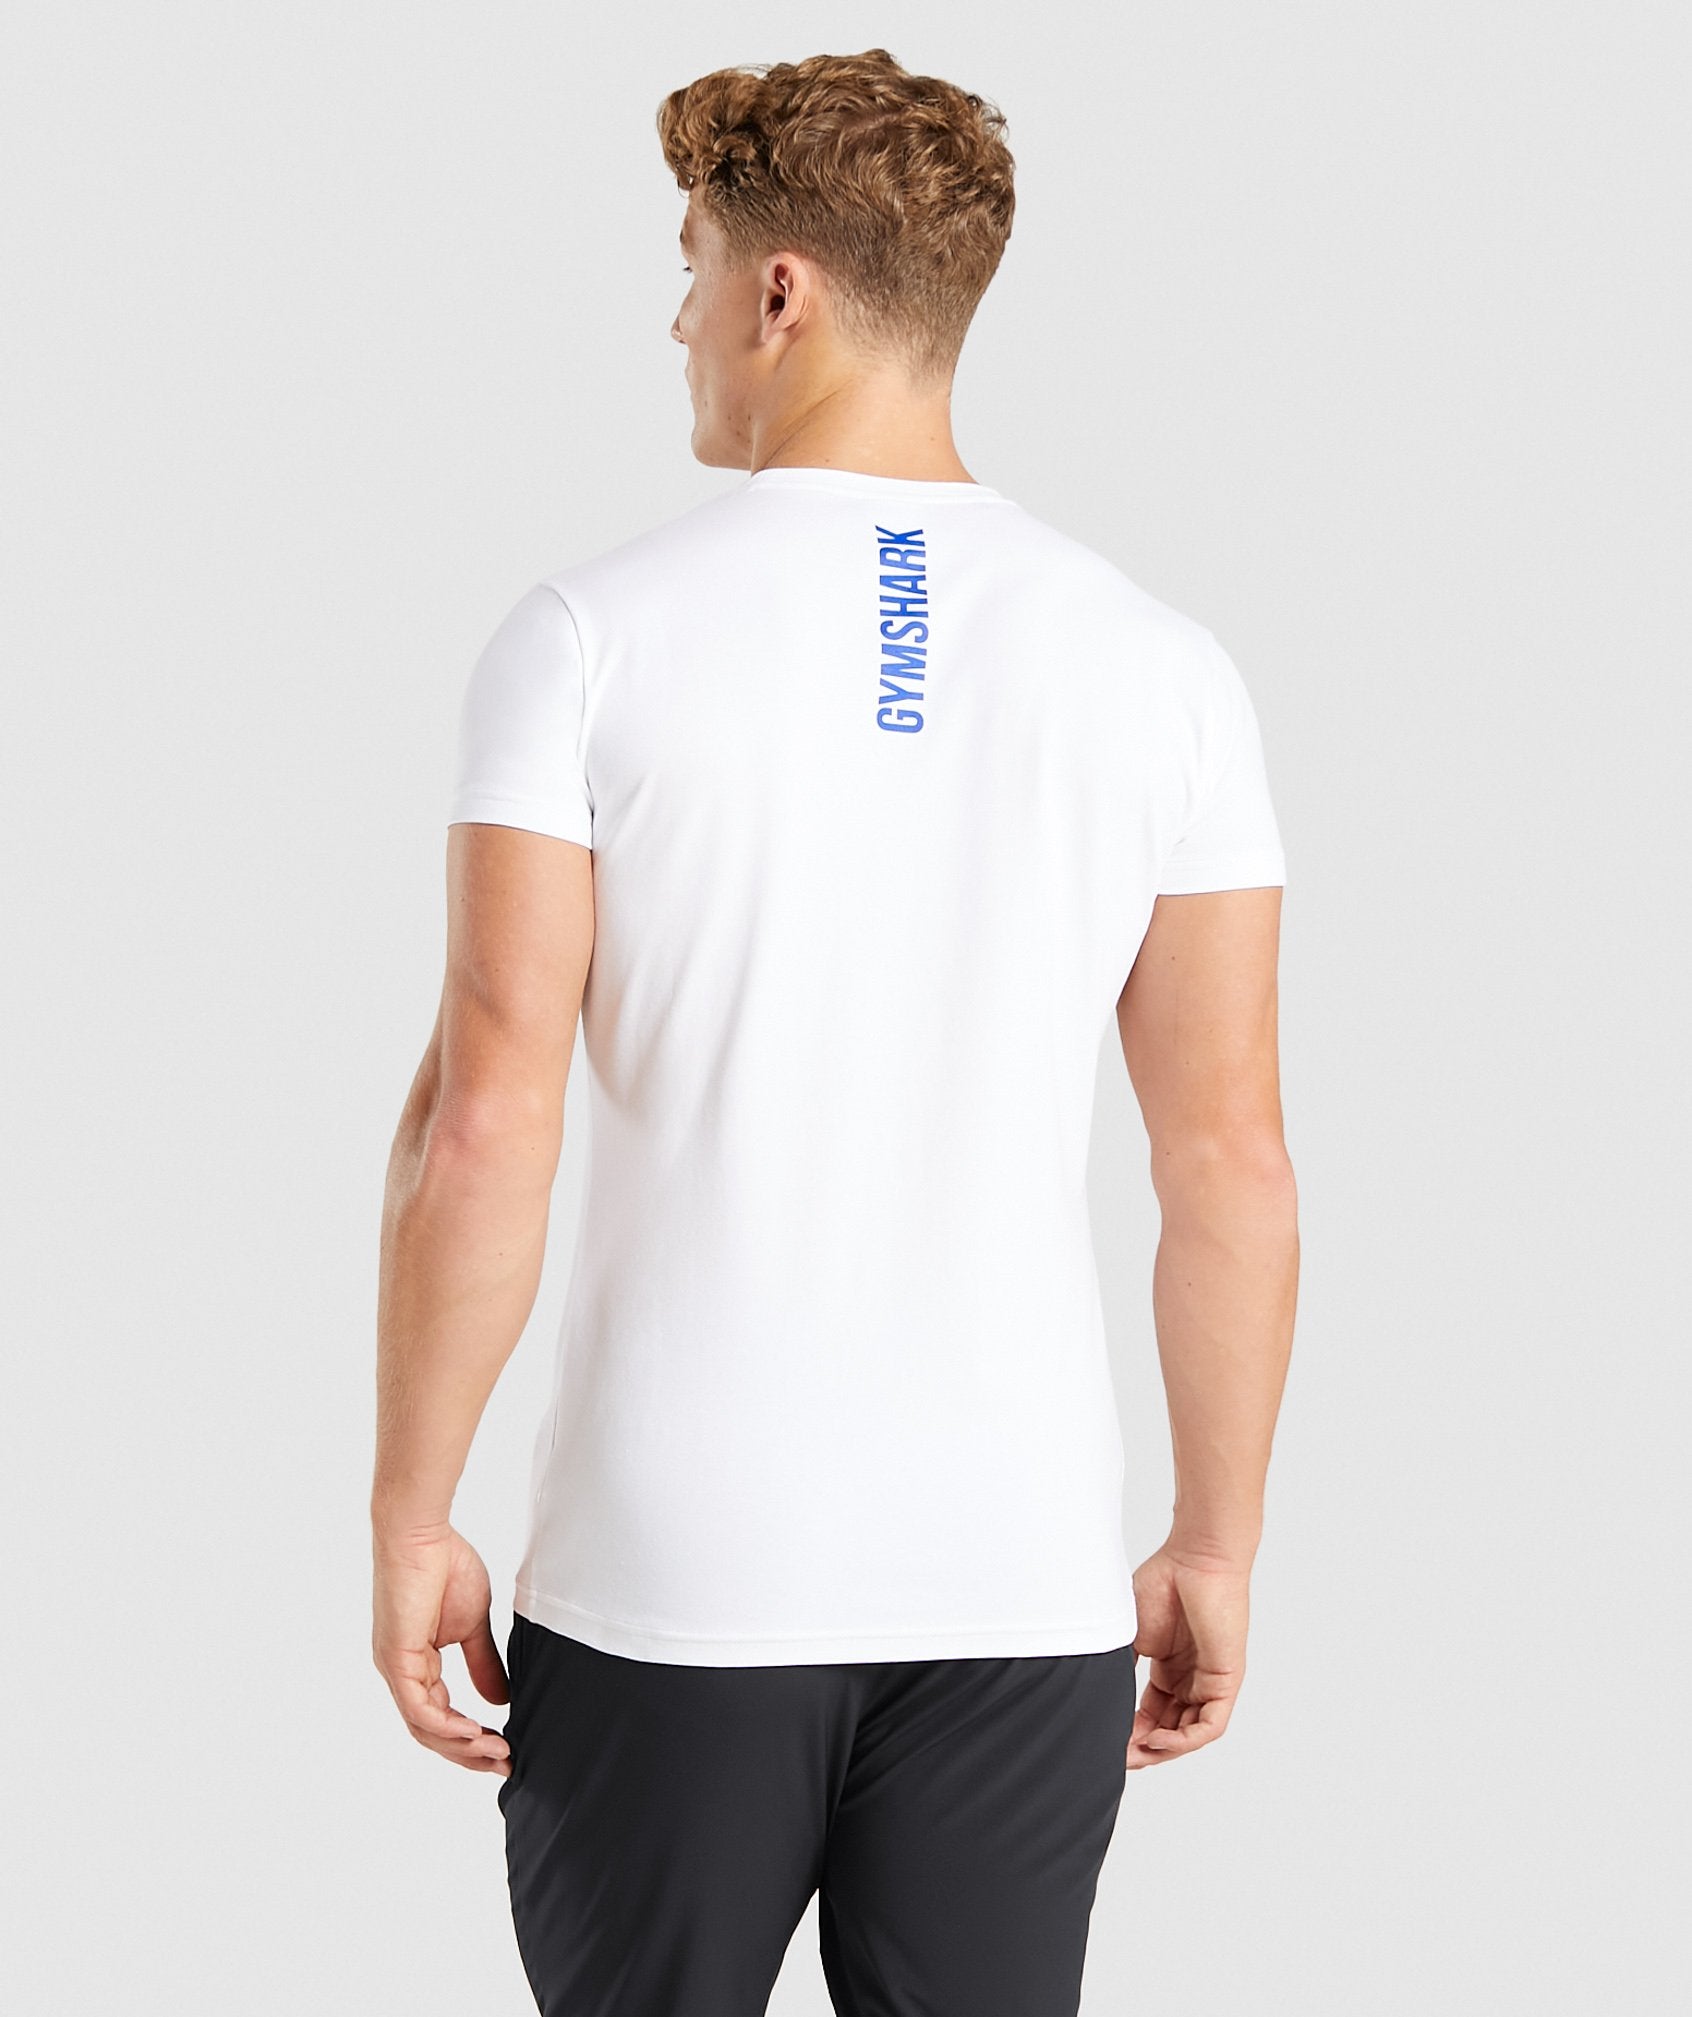 Infill T-Shirt in White - view 2